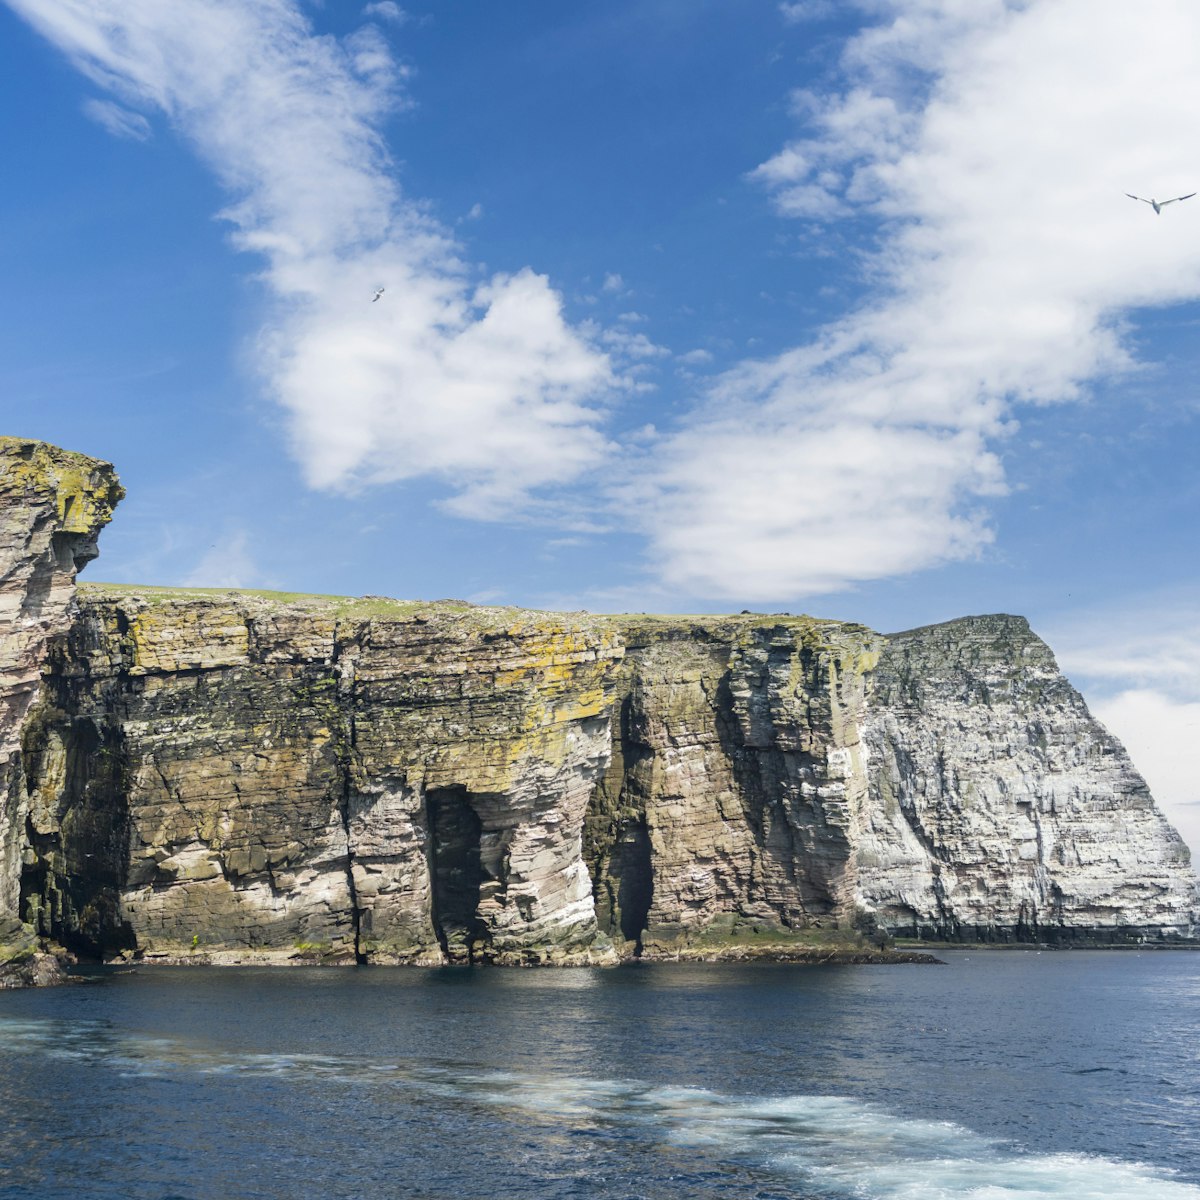 In geography and geology, a cliff is a vertical, or near vertical, rock exposure. Cliffs are formed as erosion landforms due to the processes of erosion and weathering that produce them. Cliffs are common on coasts, in mountainous areas, escarpments and along rivers. Cliffs are usually formed by rock that is resistant to erosion and weathering. Sedimentary rocks most likely to form cliffs include sandstone, limestone, chalk, and dolomite. Igneous rocks such as granite and basalt also often form cliffs.